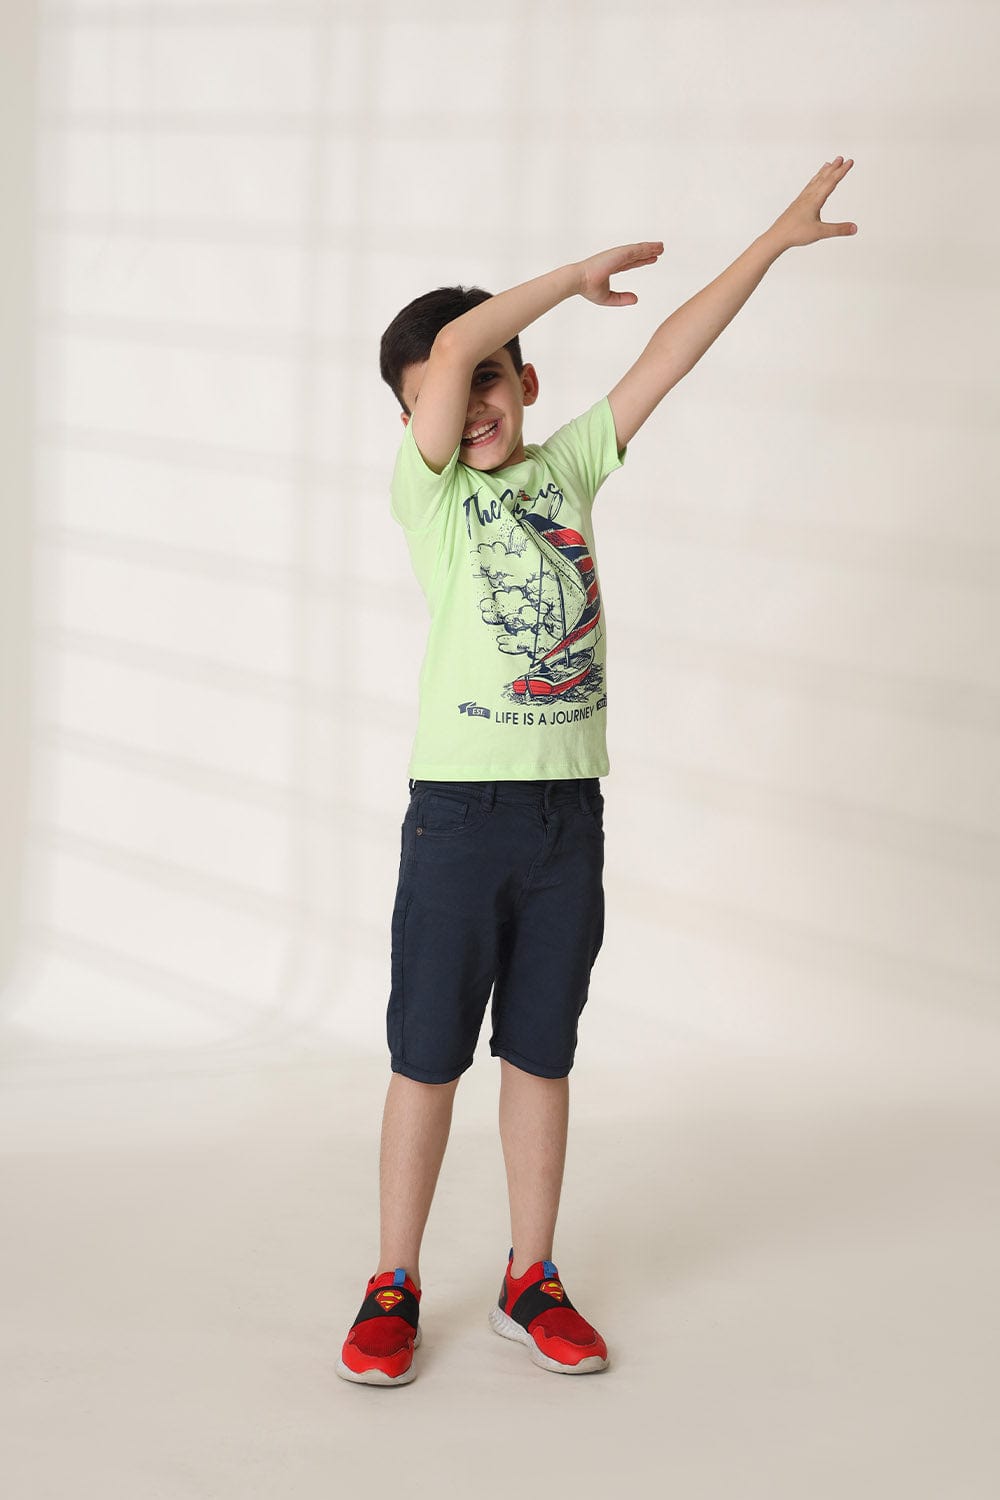 Hope Not Out by Shahid Afridi Boys Knit T-Shirt Light Green Sail Boat T-Shirt for Boys